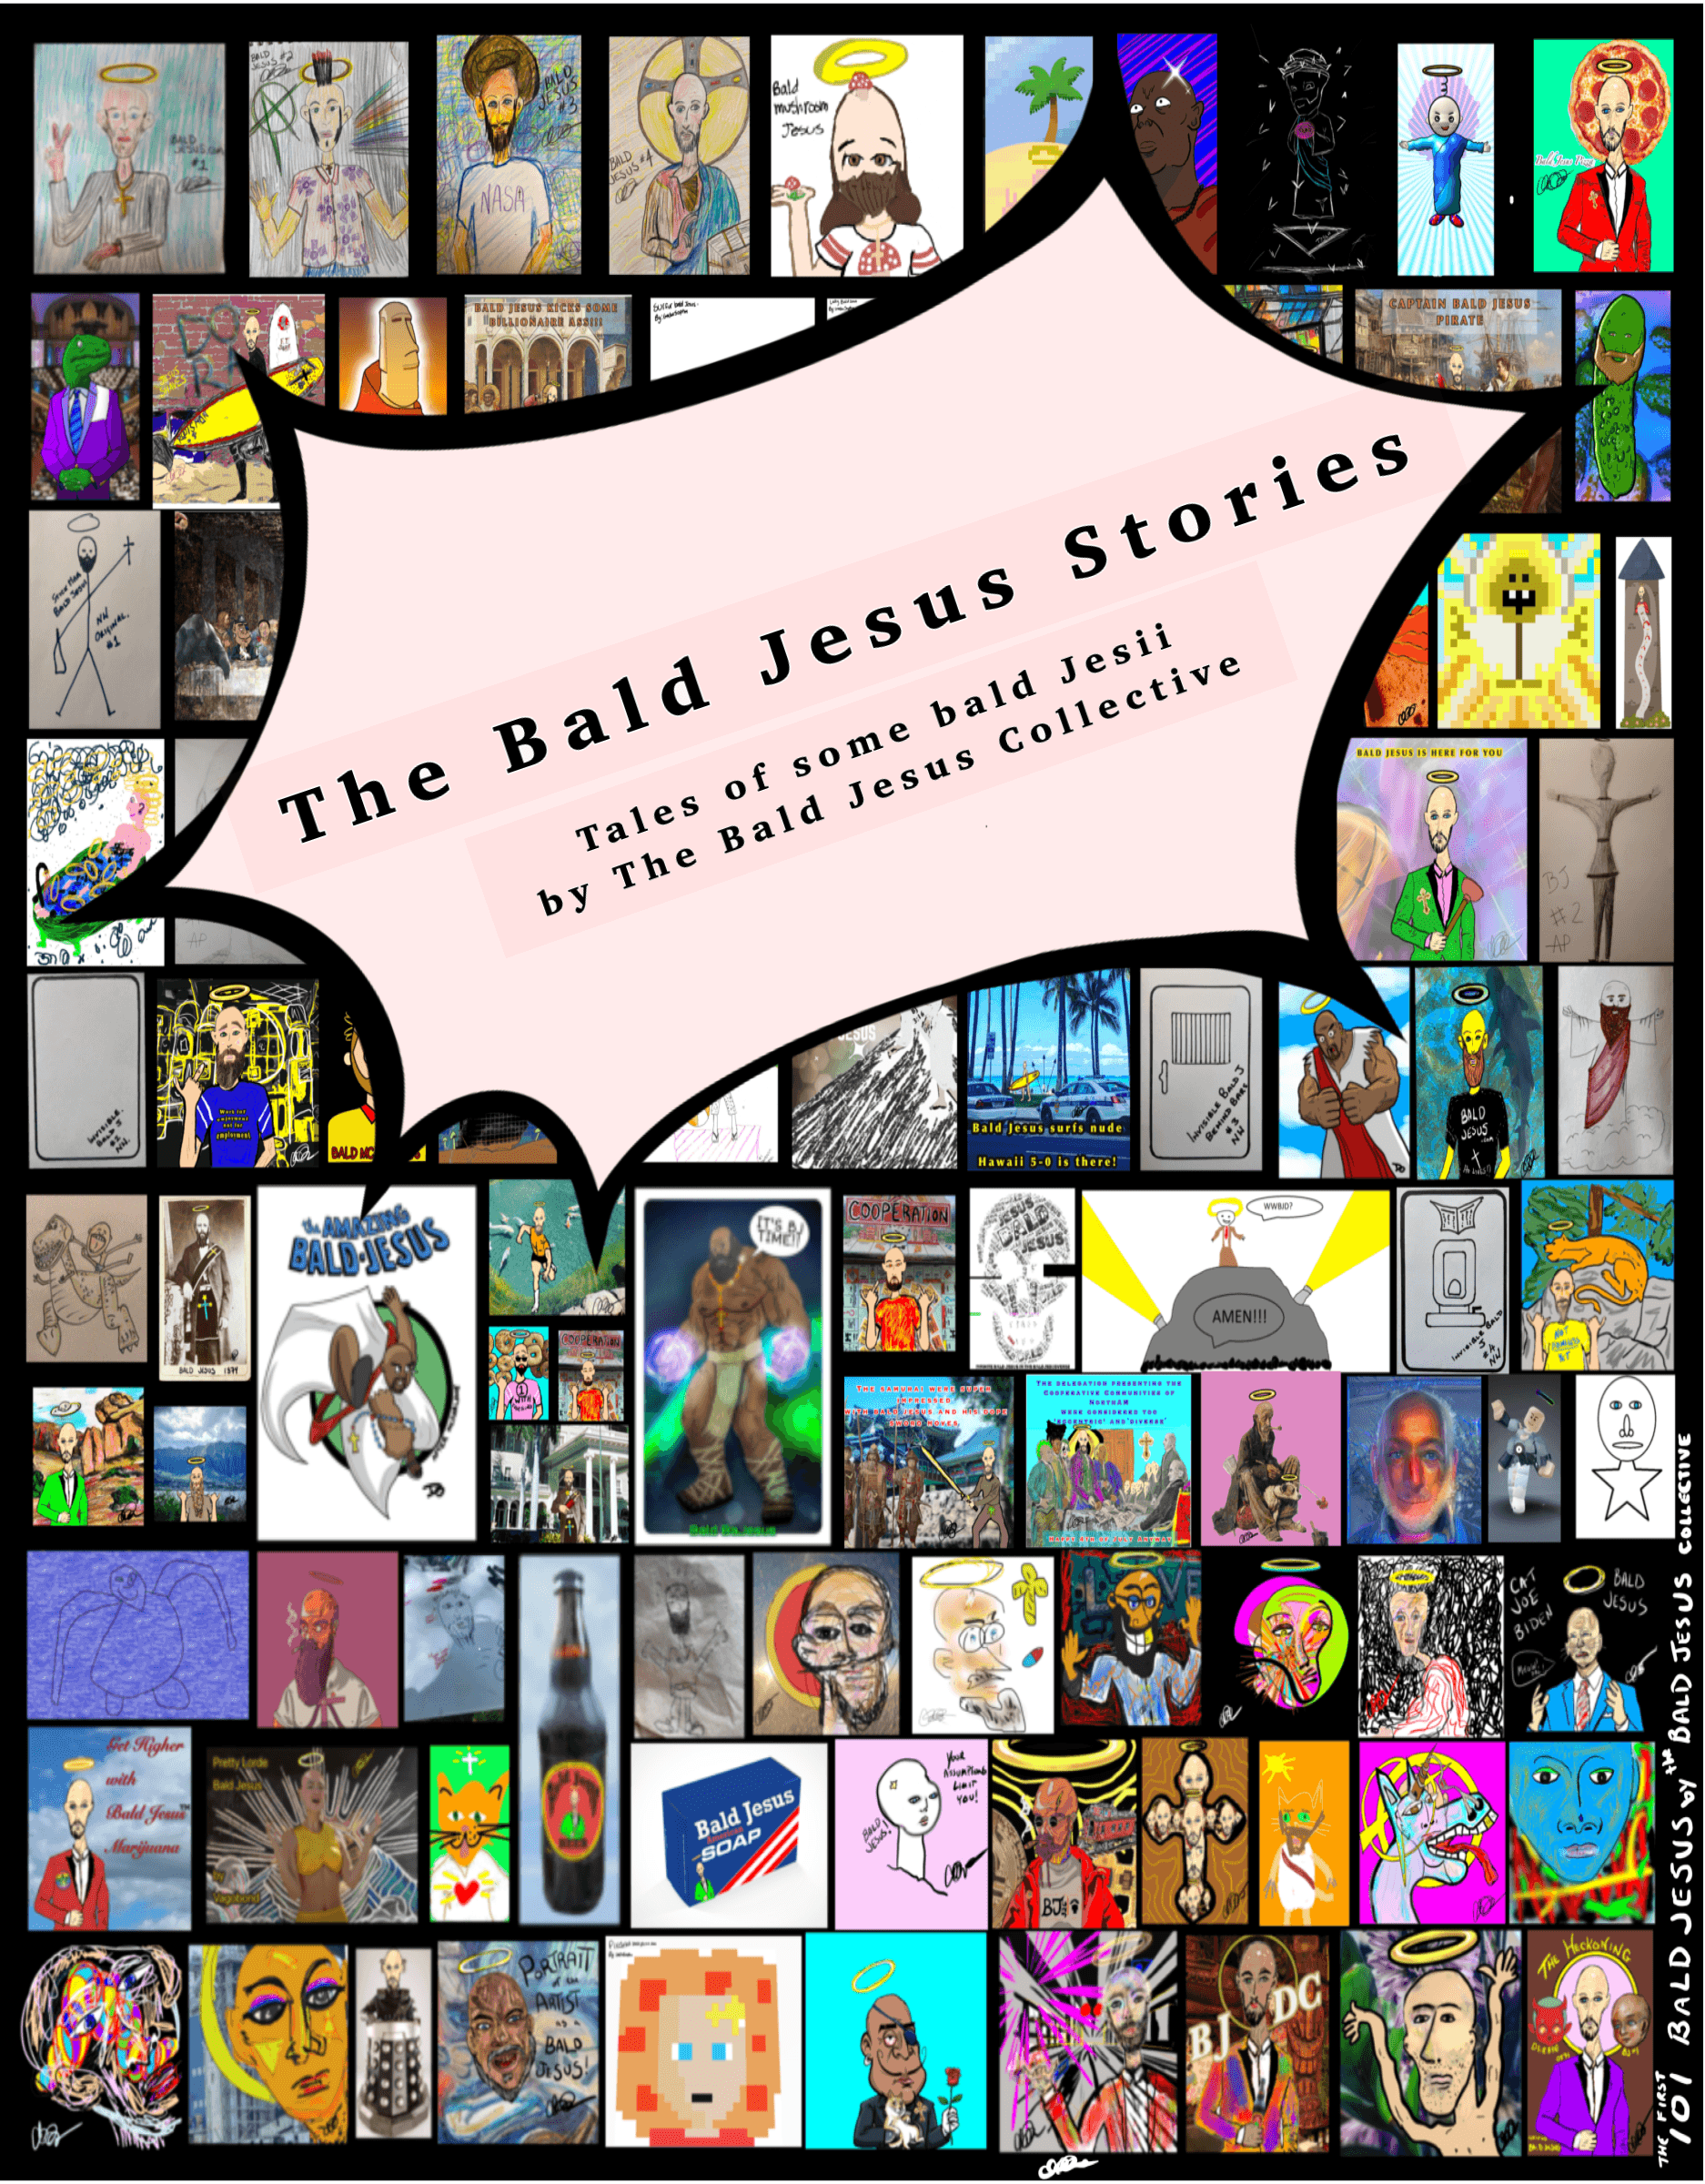 The Bald Jesus Stories: Tales of Some Bald Jesii by The Bald Jesus Collective